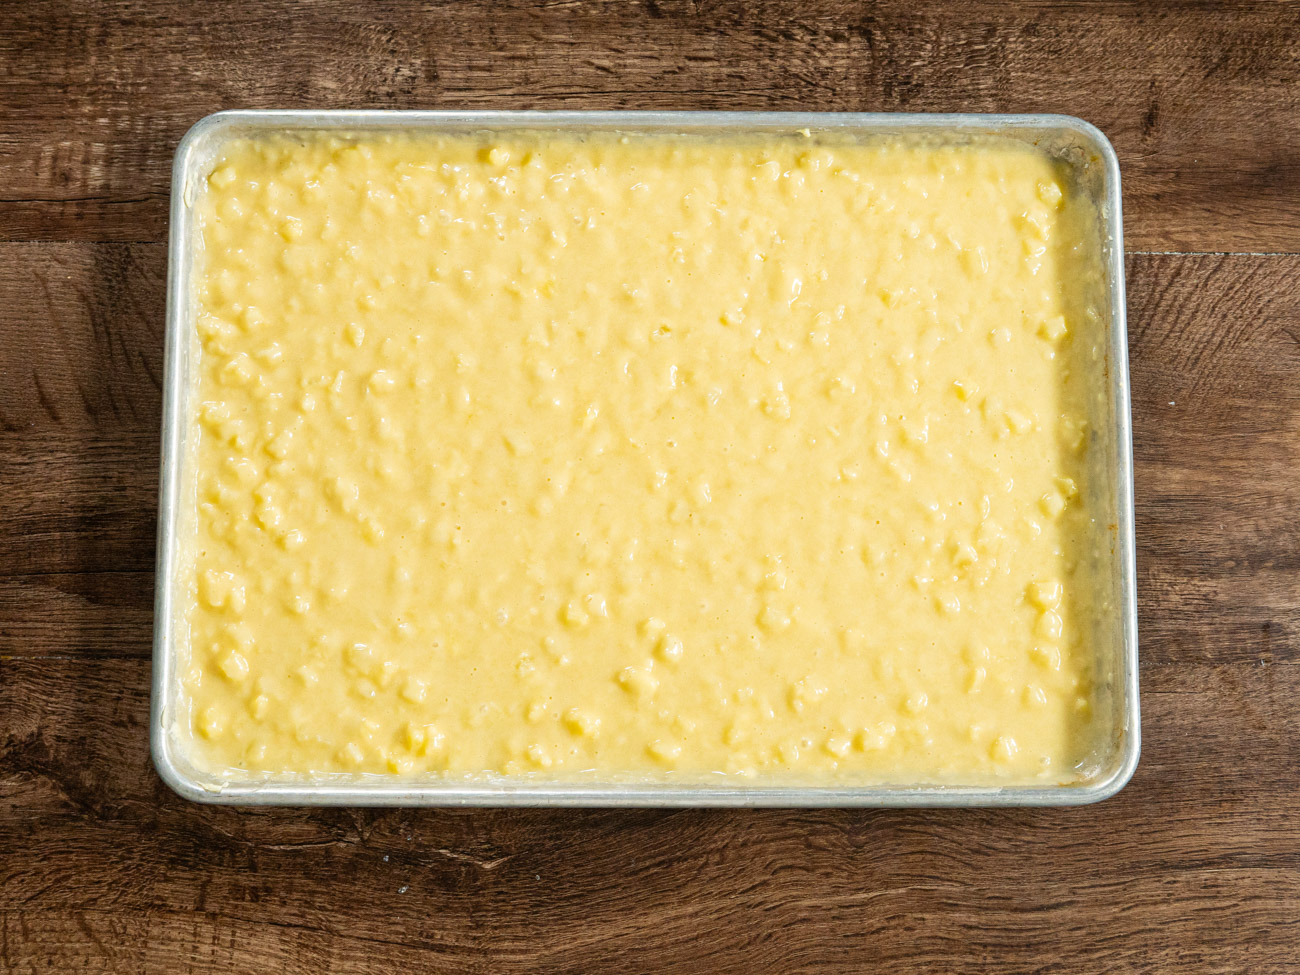 Pour the batter into the prepared sheet pan and bake for 25-30 minutes.